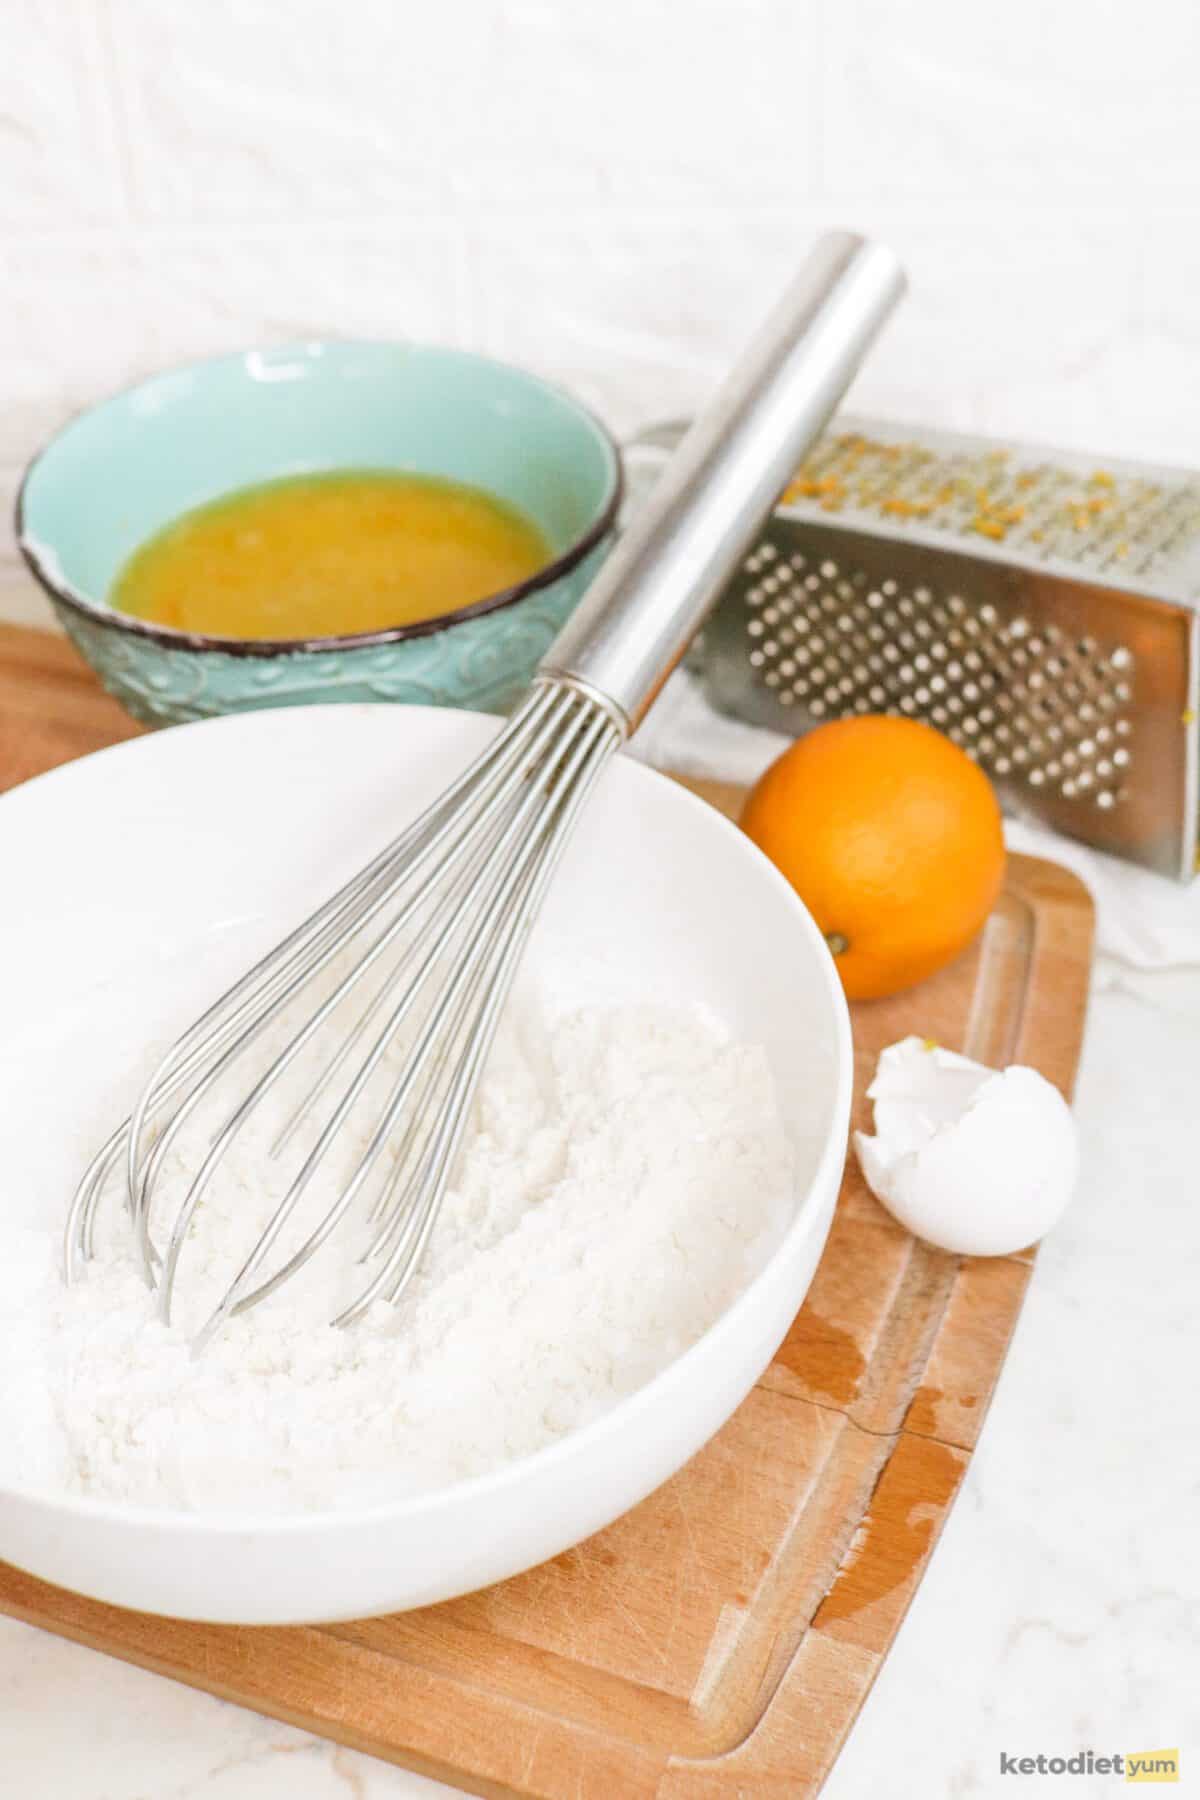 Combining the dry ingredients for the orange cake